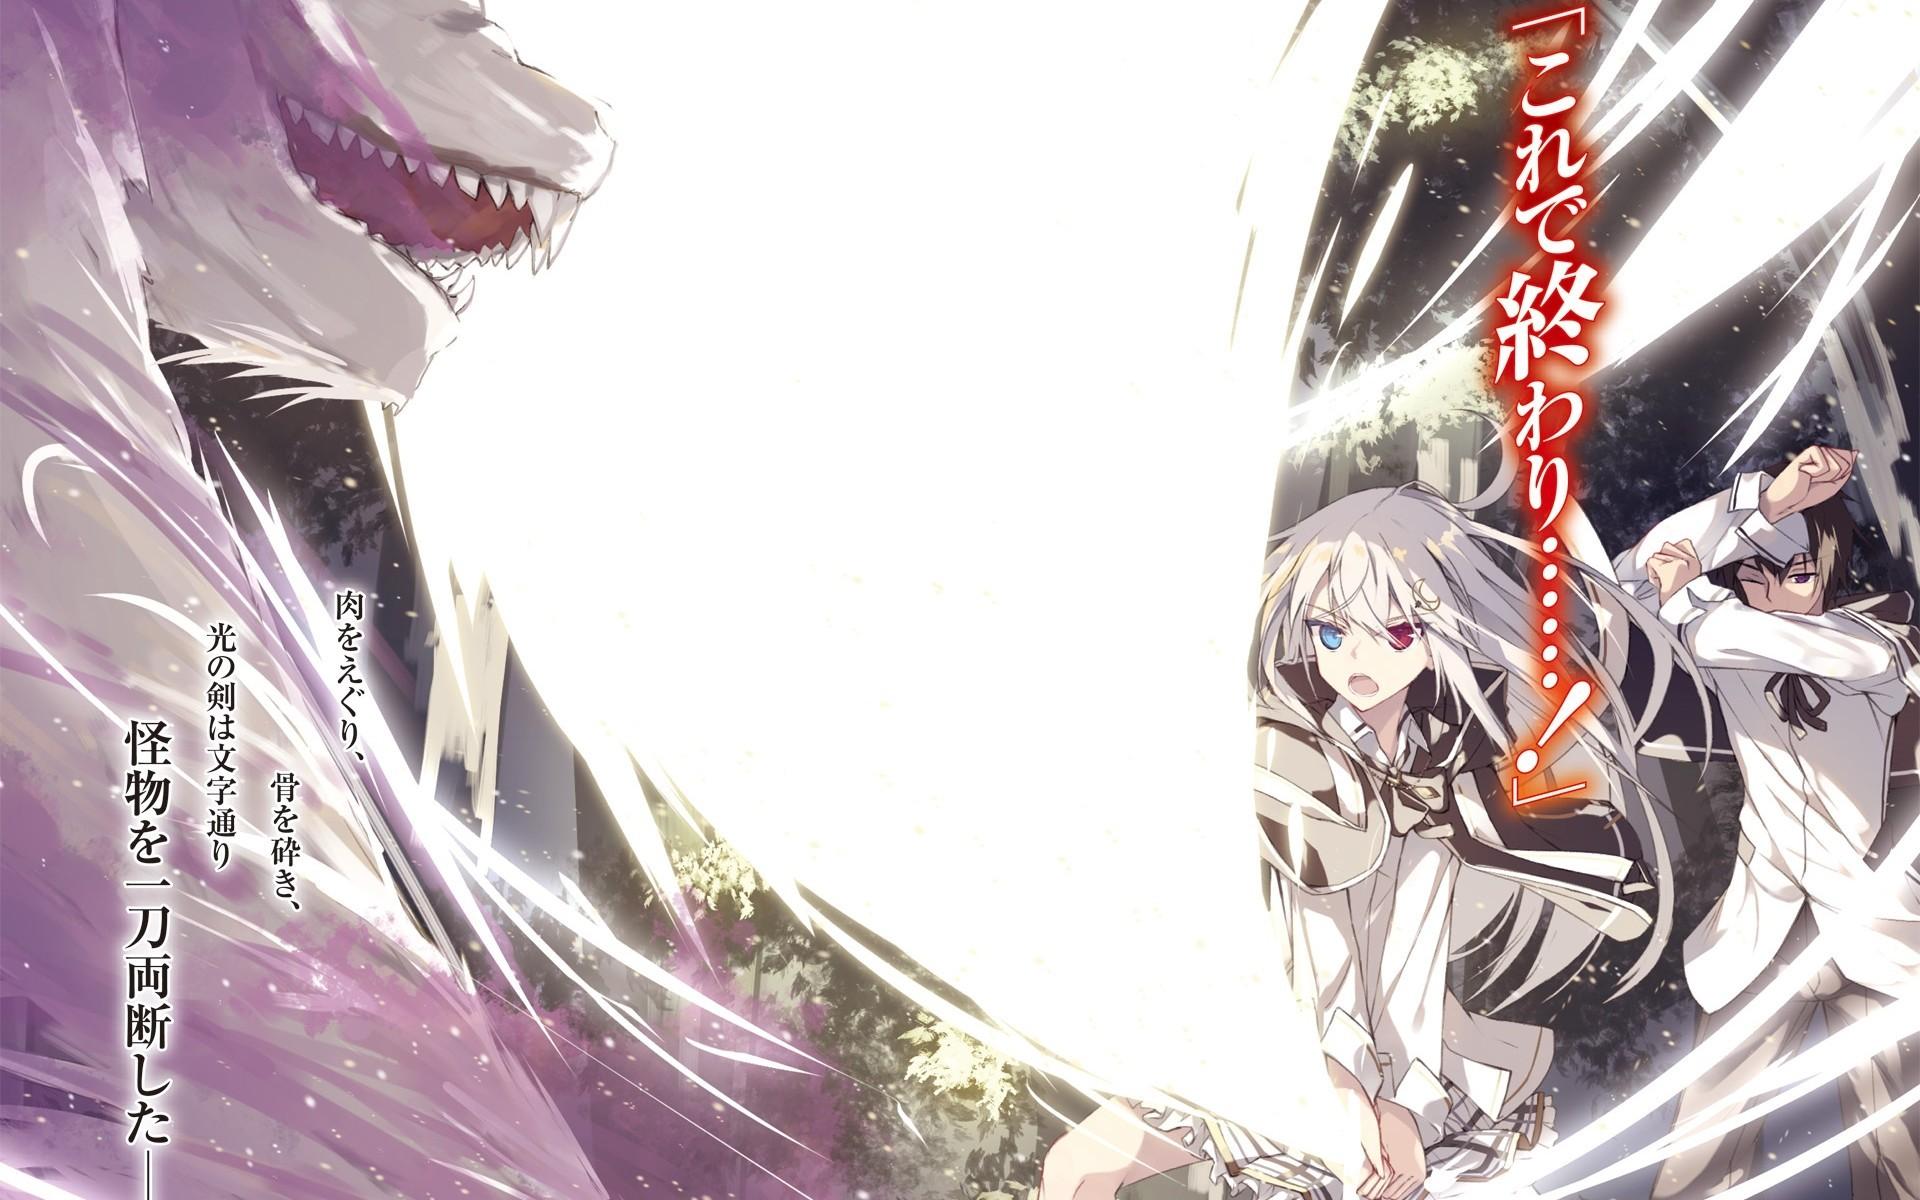 Download 1920x1200 Anime Girl And Boy, Monster, Sword, Fighting